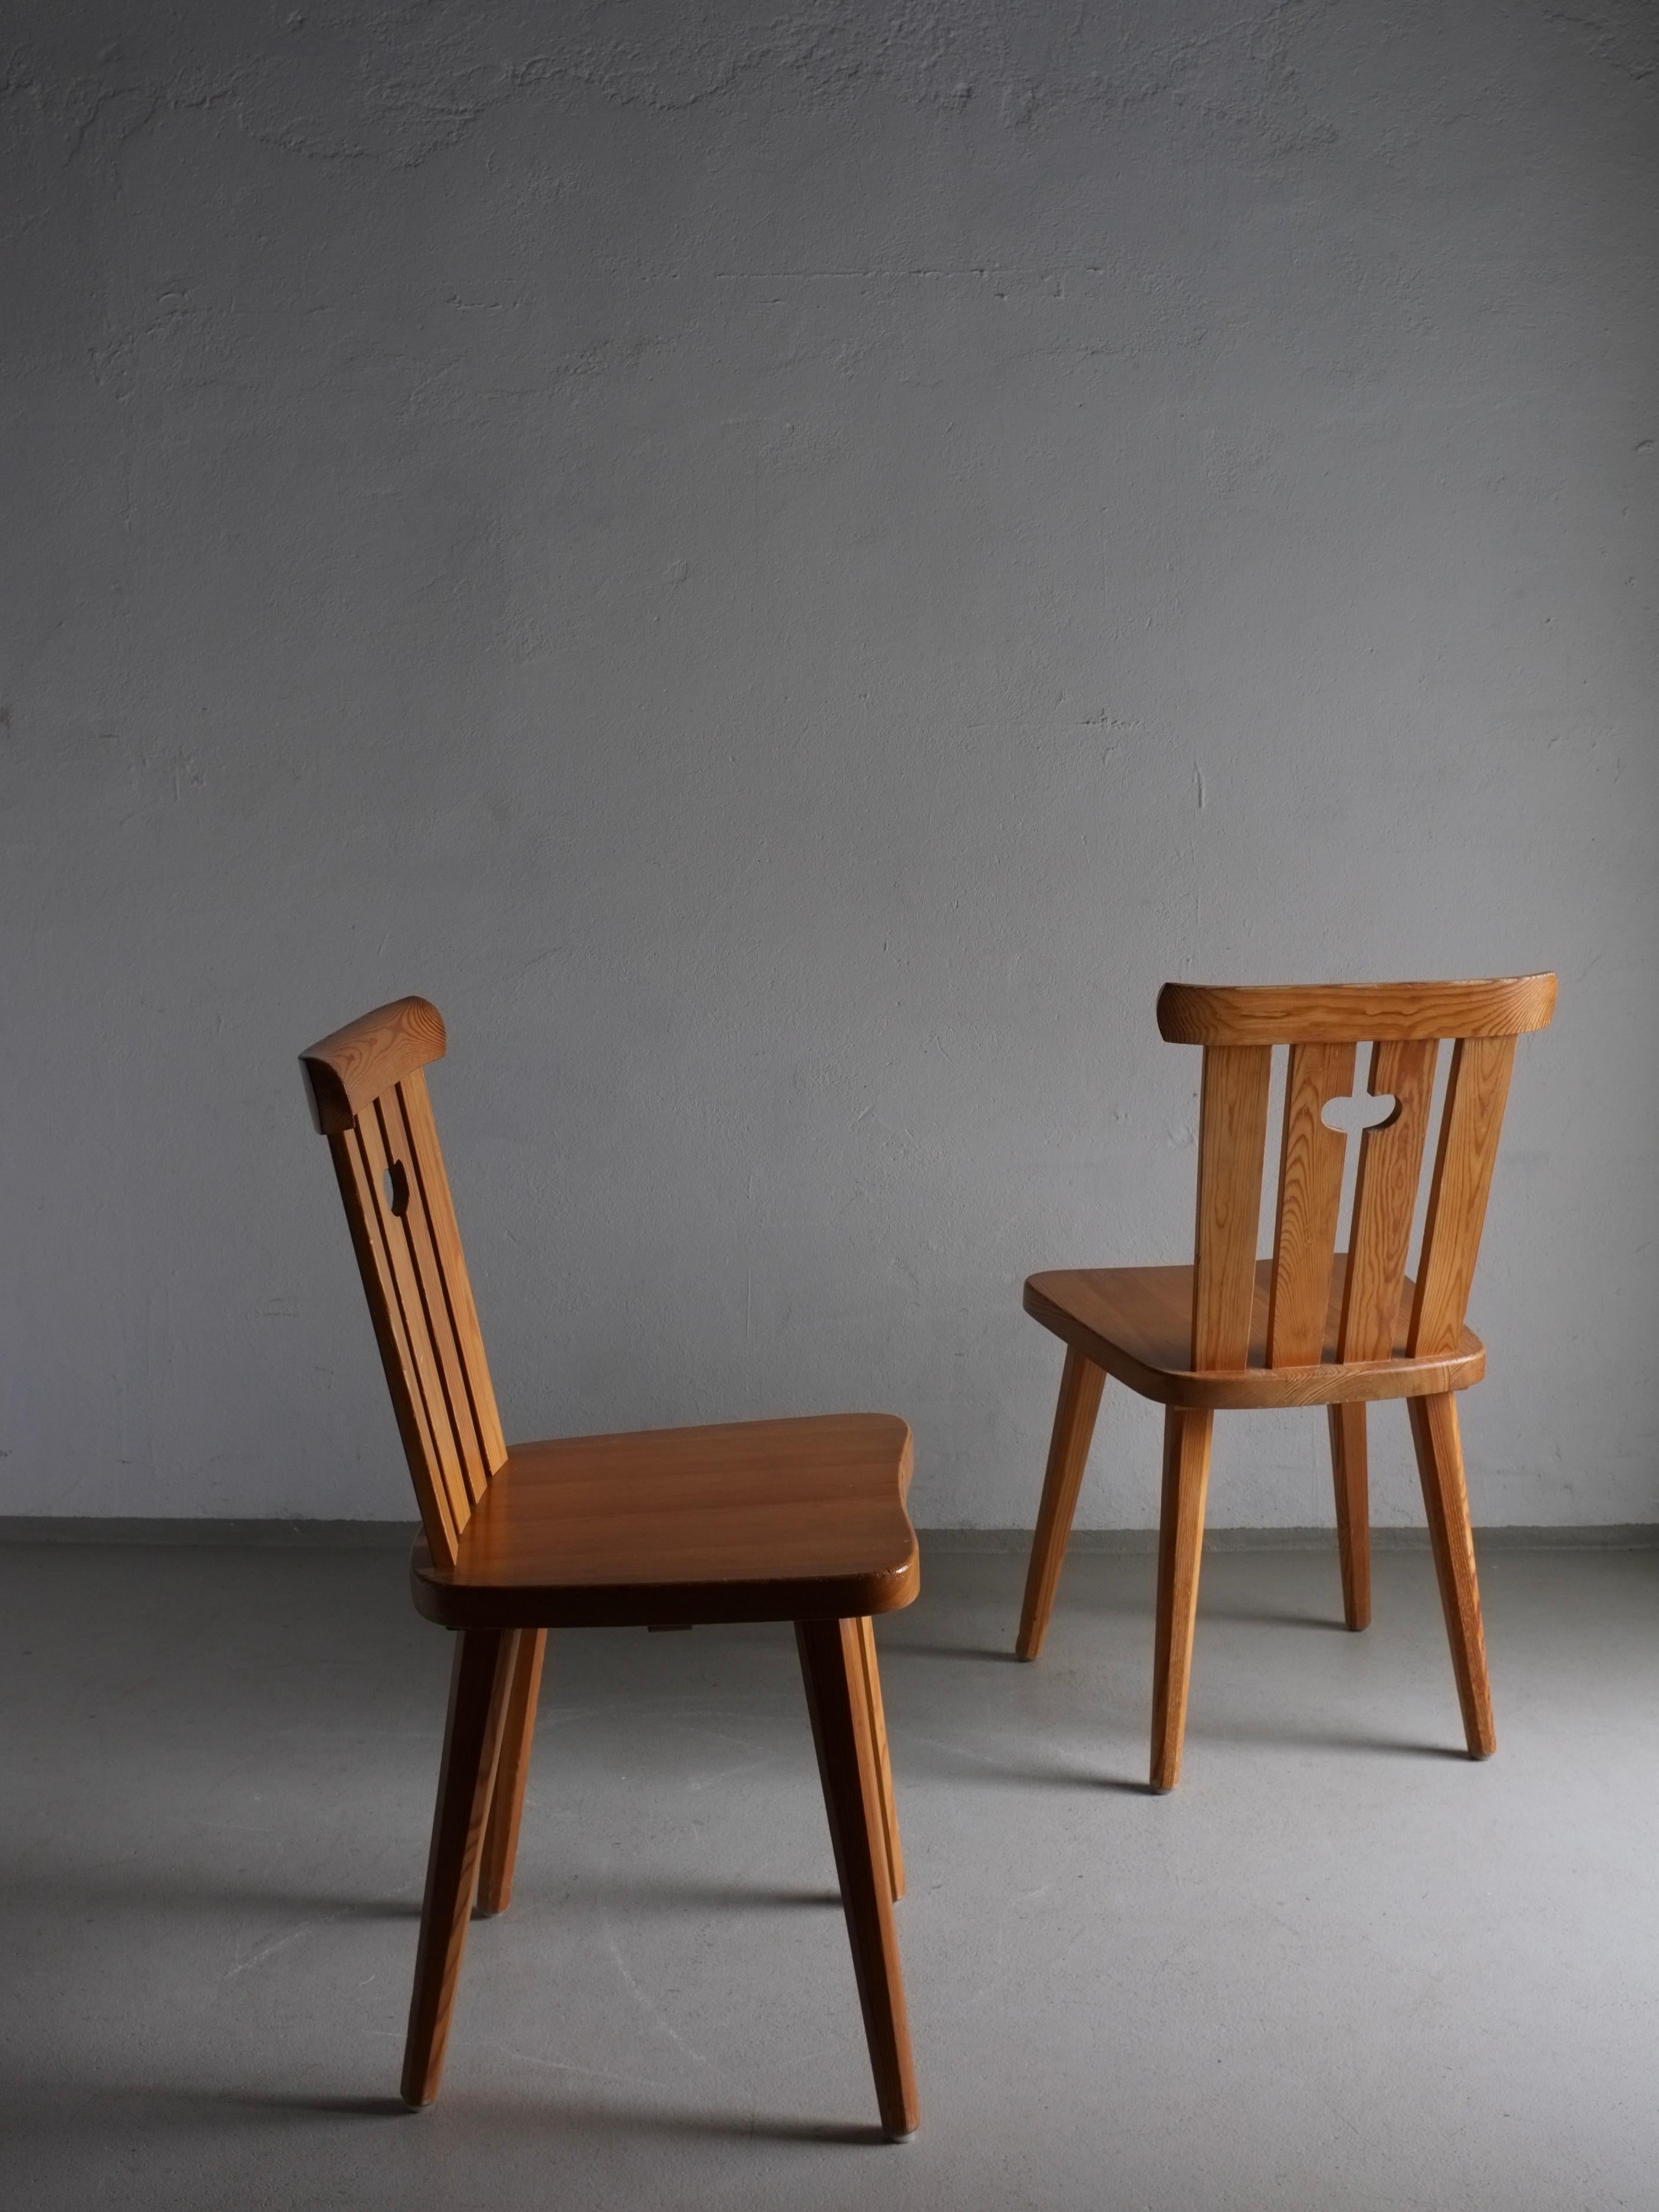 Swedish Set of 2 Solid Pine Chairs, Göran Malmvall, Sweden 1940s For Sale